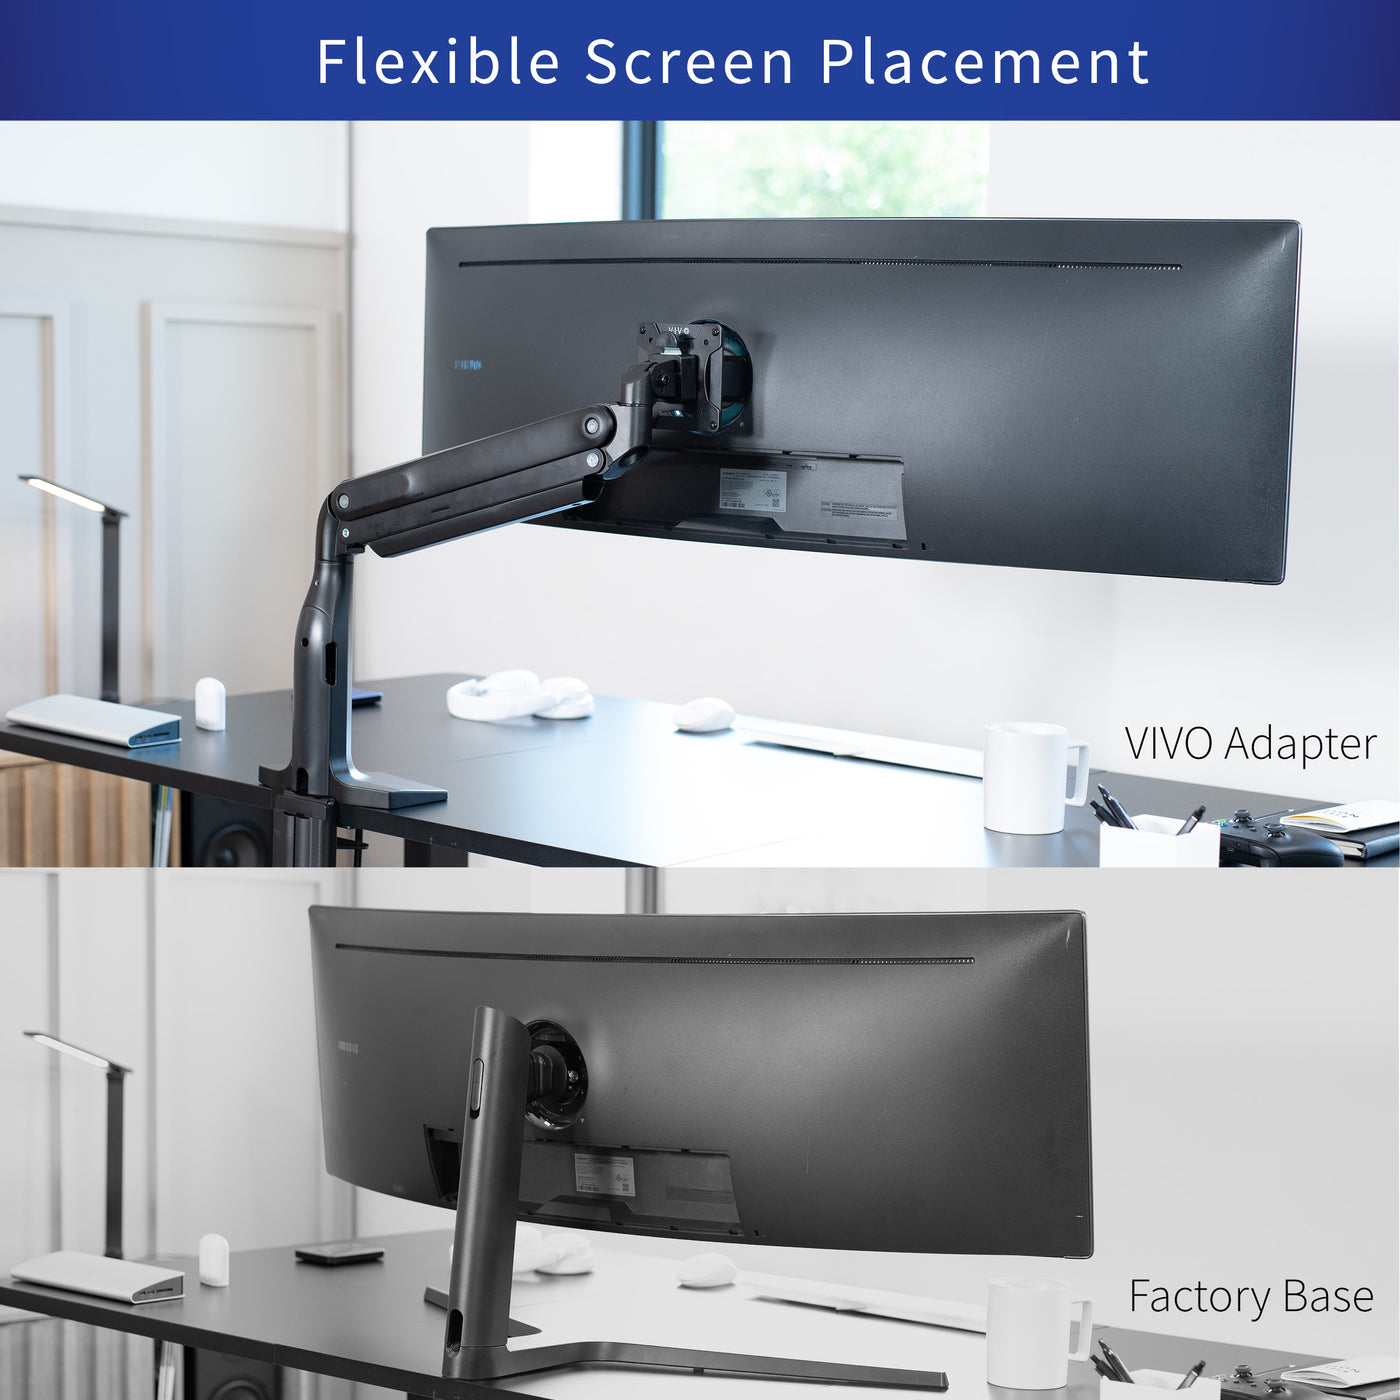 VESA Adapter Designed for Compatible Samsung Neo G9, G65B, G70A, G75T, G85NB, CRG9, CHG9, CHG90, and Odyssey G9, allowing your non VESA compatible monitor to be mounted to a stand of your choice.